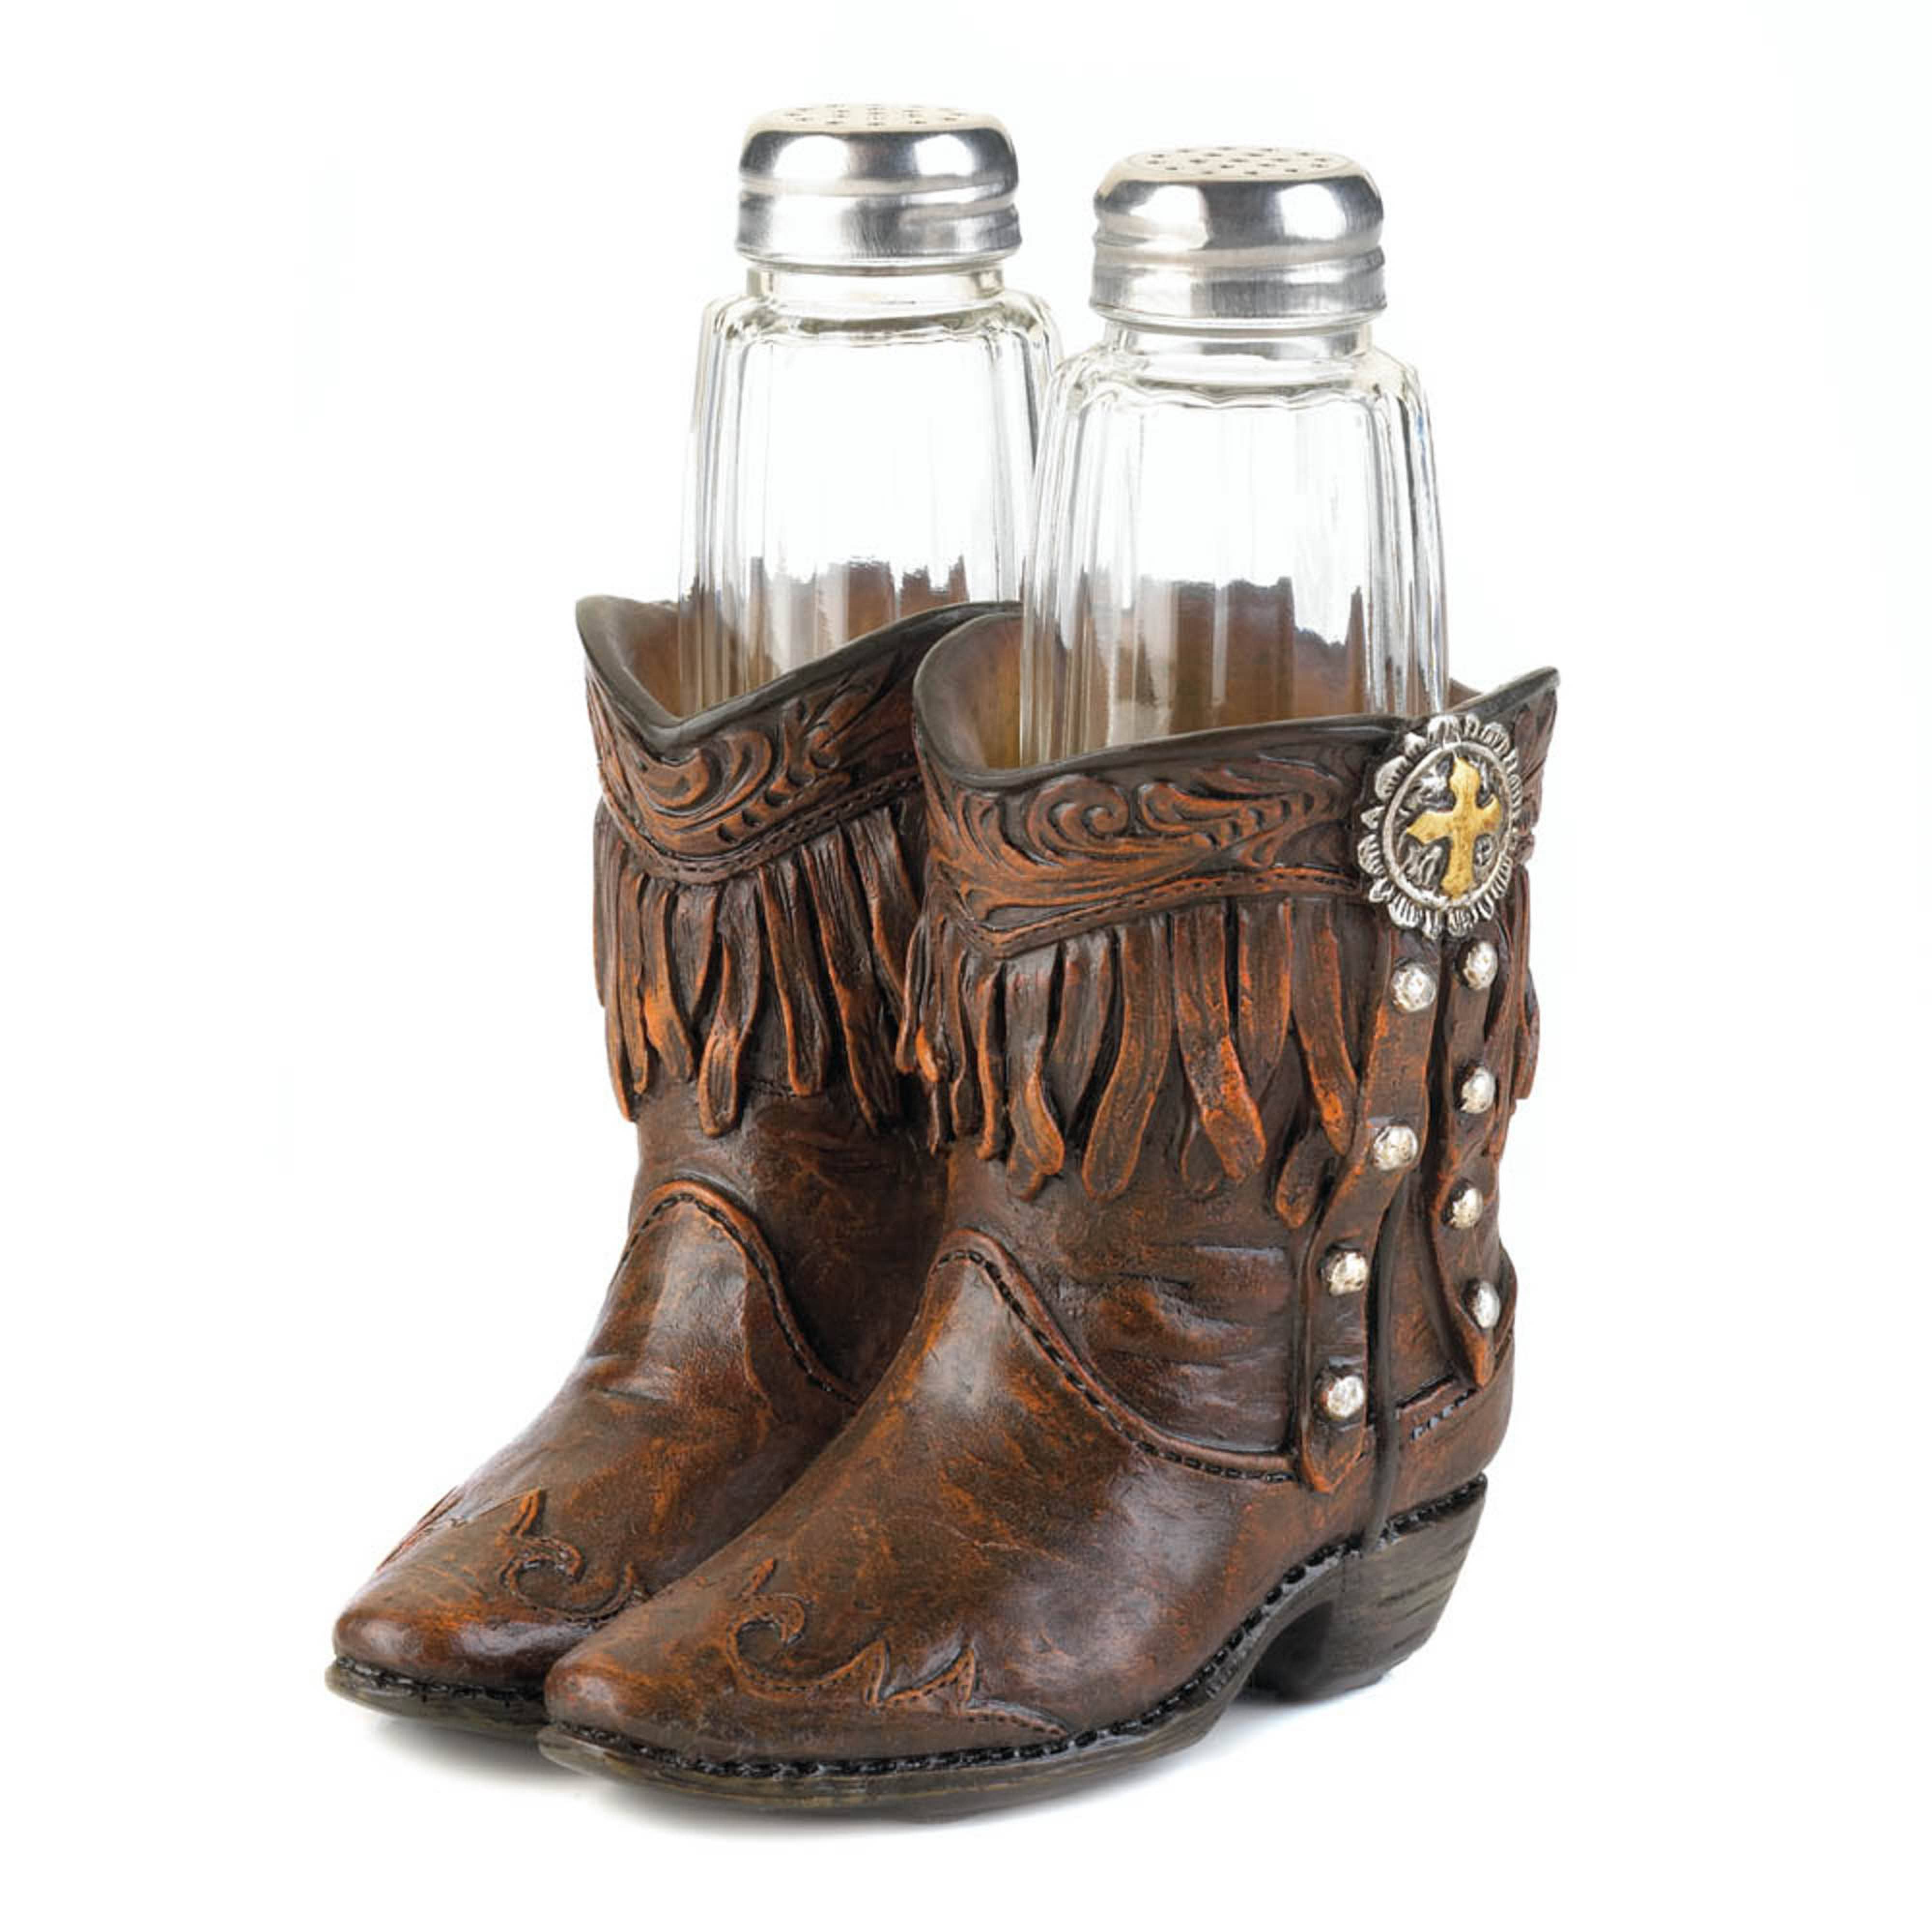 Cowboy Boots S and P Shakers Holder Set